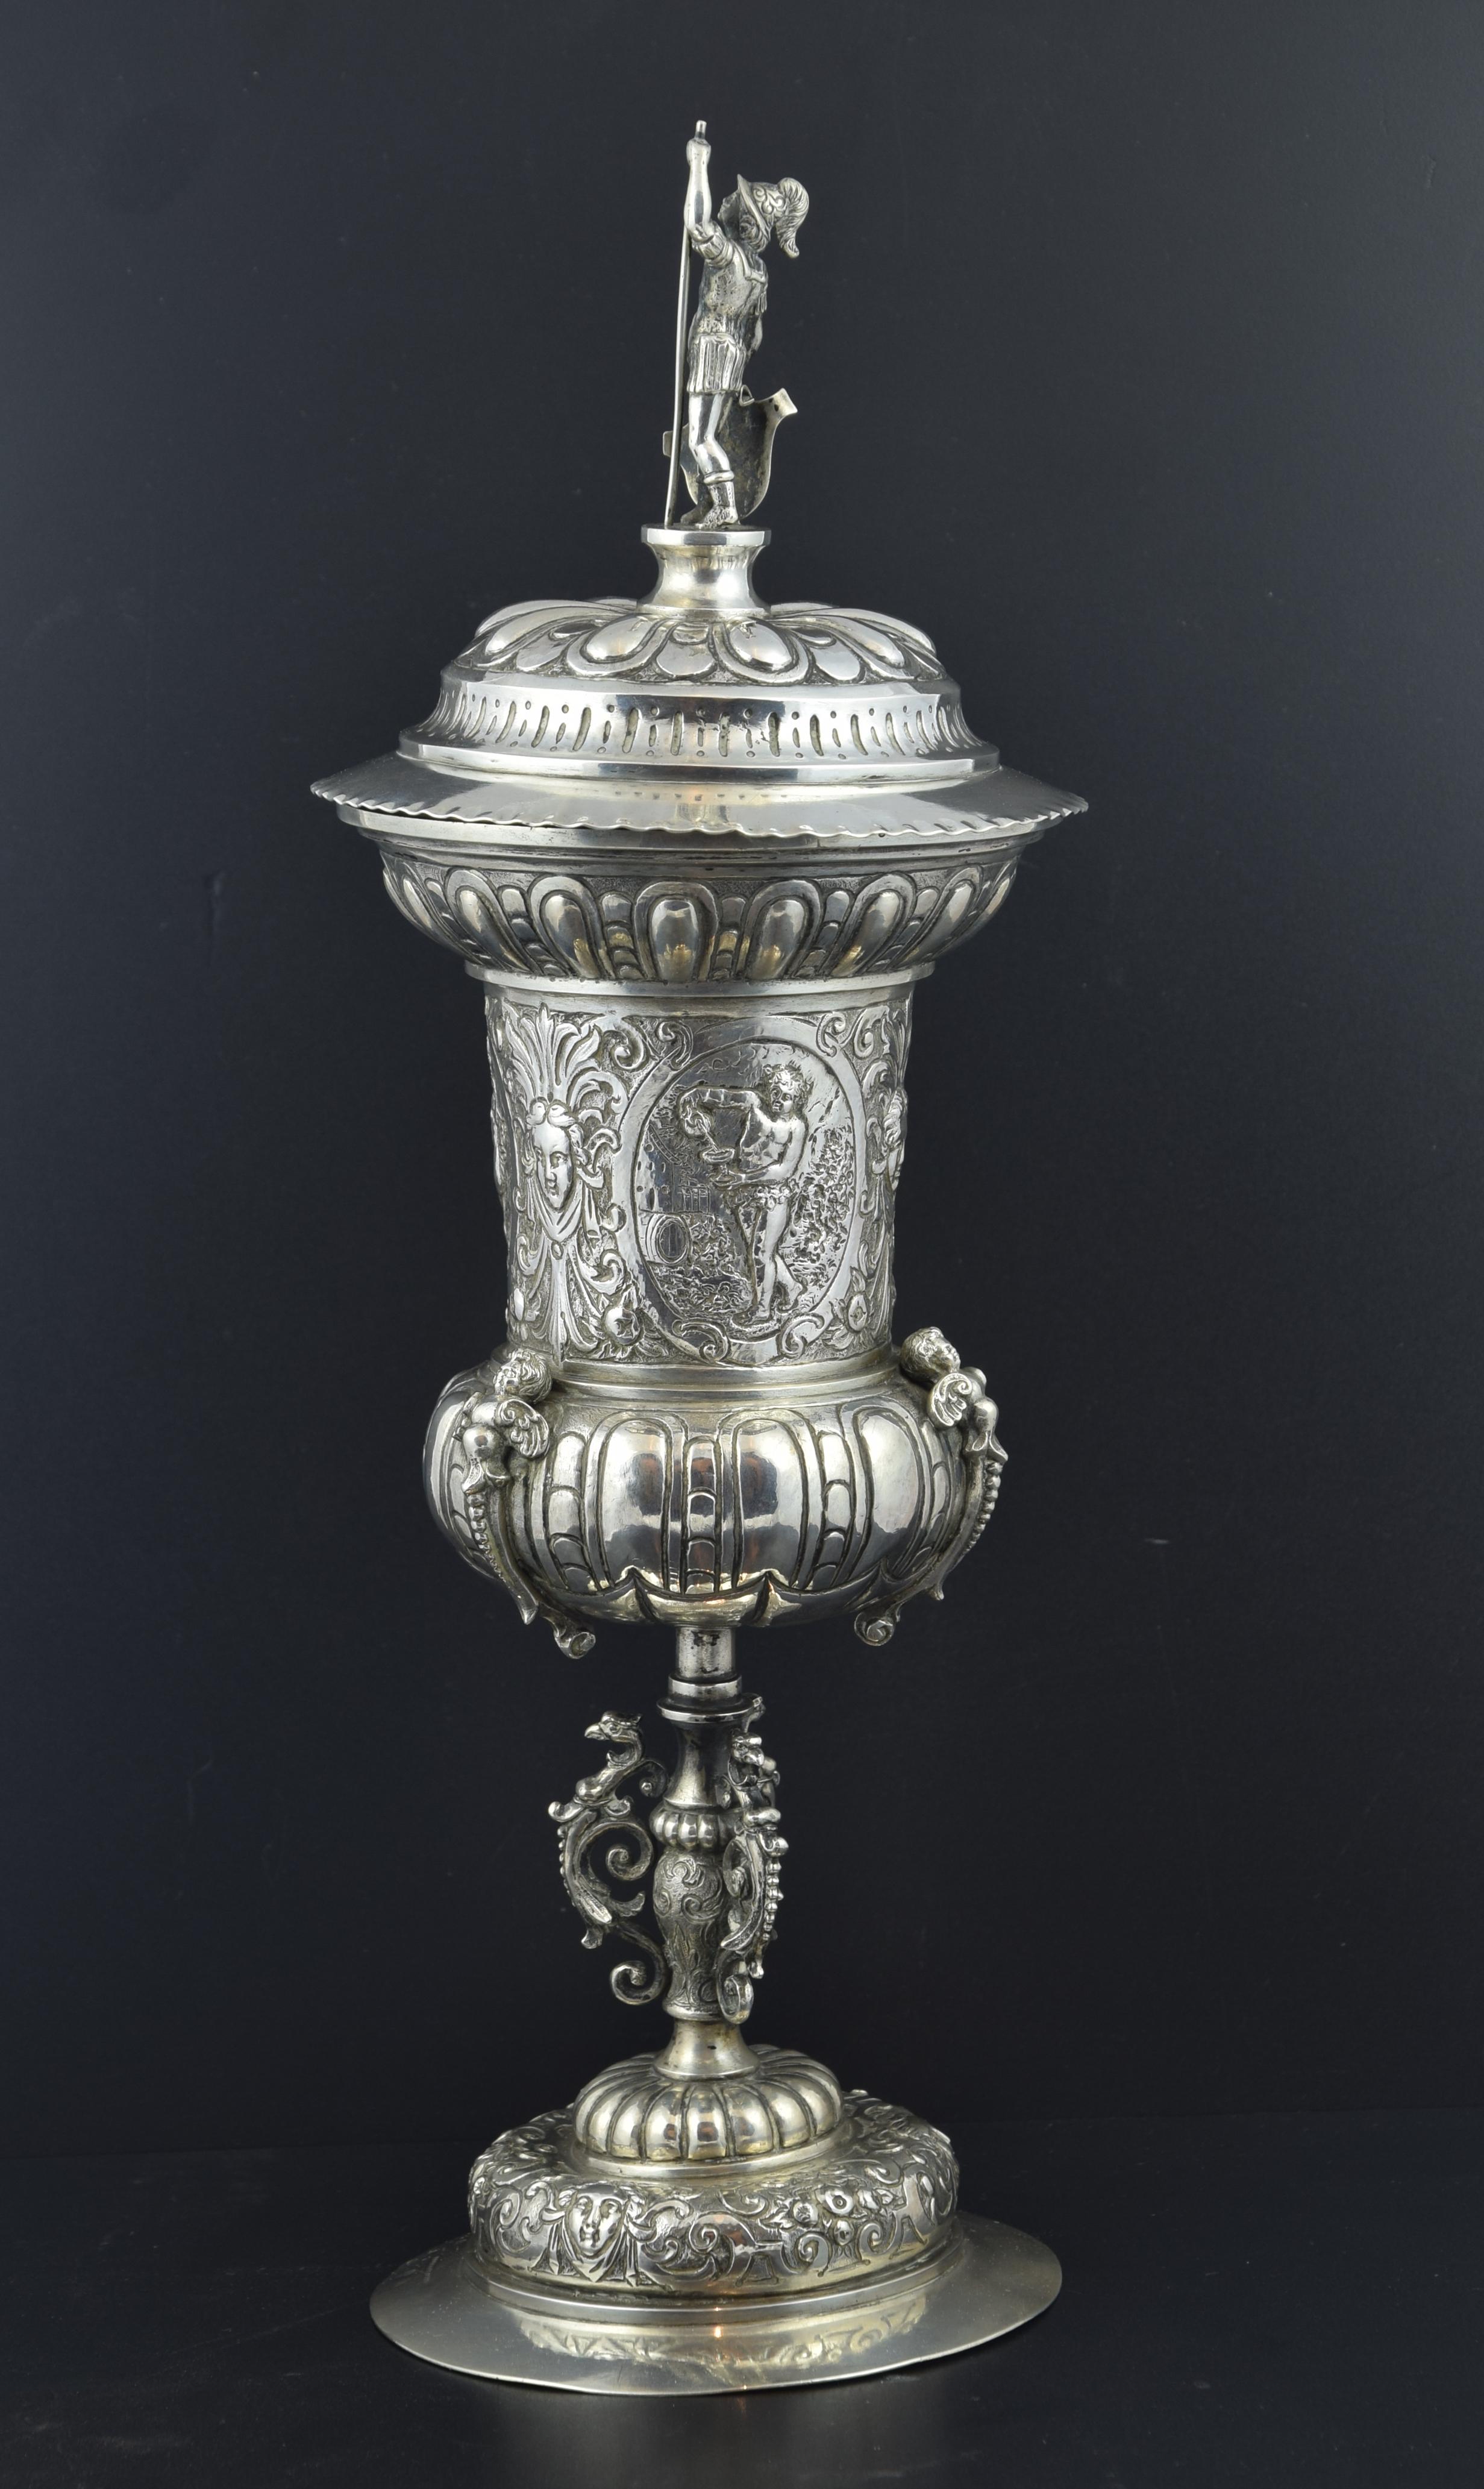 It is made entirely in silver and decorated with patterns in relief, round, engraved and chiseled. It is inspired by similar pieces made in Germany in the 16th century in the Mannerism art. This is due to the importance that the German silversmith